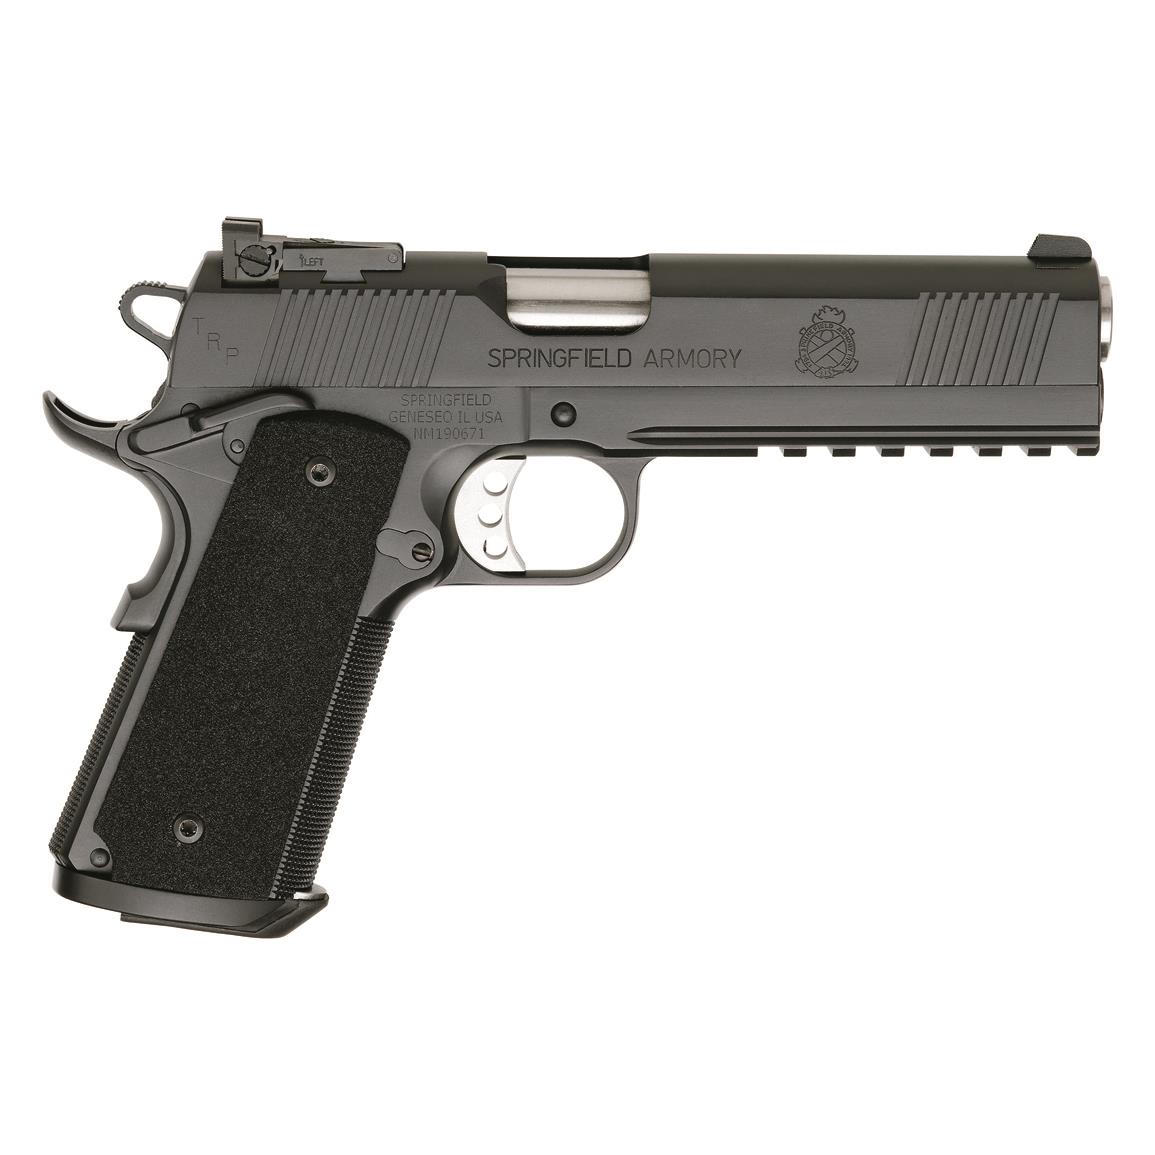 Springfield 1911 TRP Stainless Steel, Semi-Automatic, .45 ACP, 5" Barrel, 7+1 Rounds